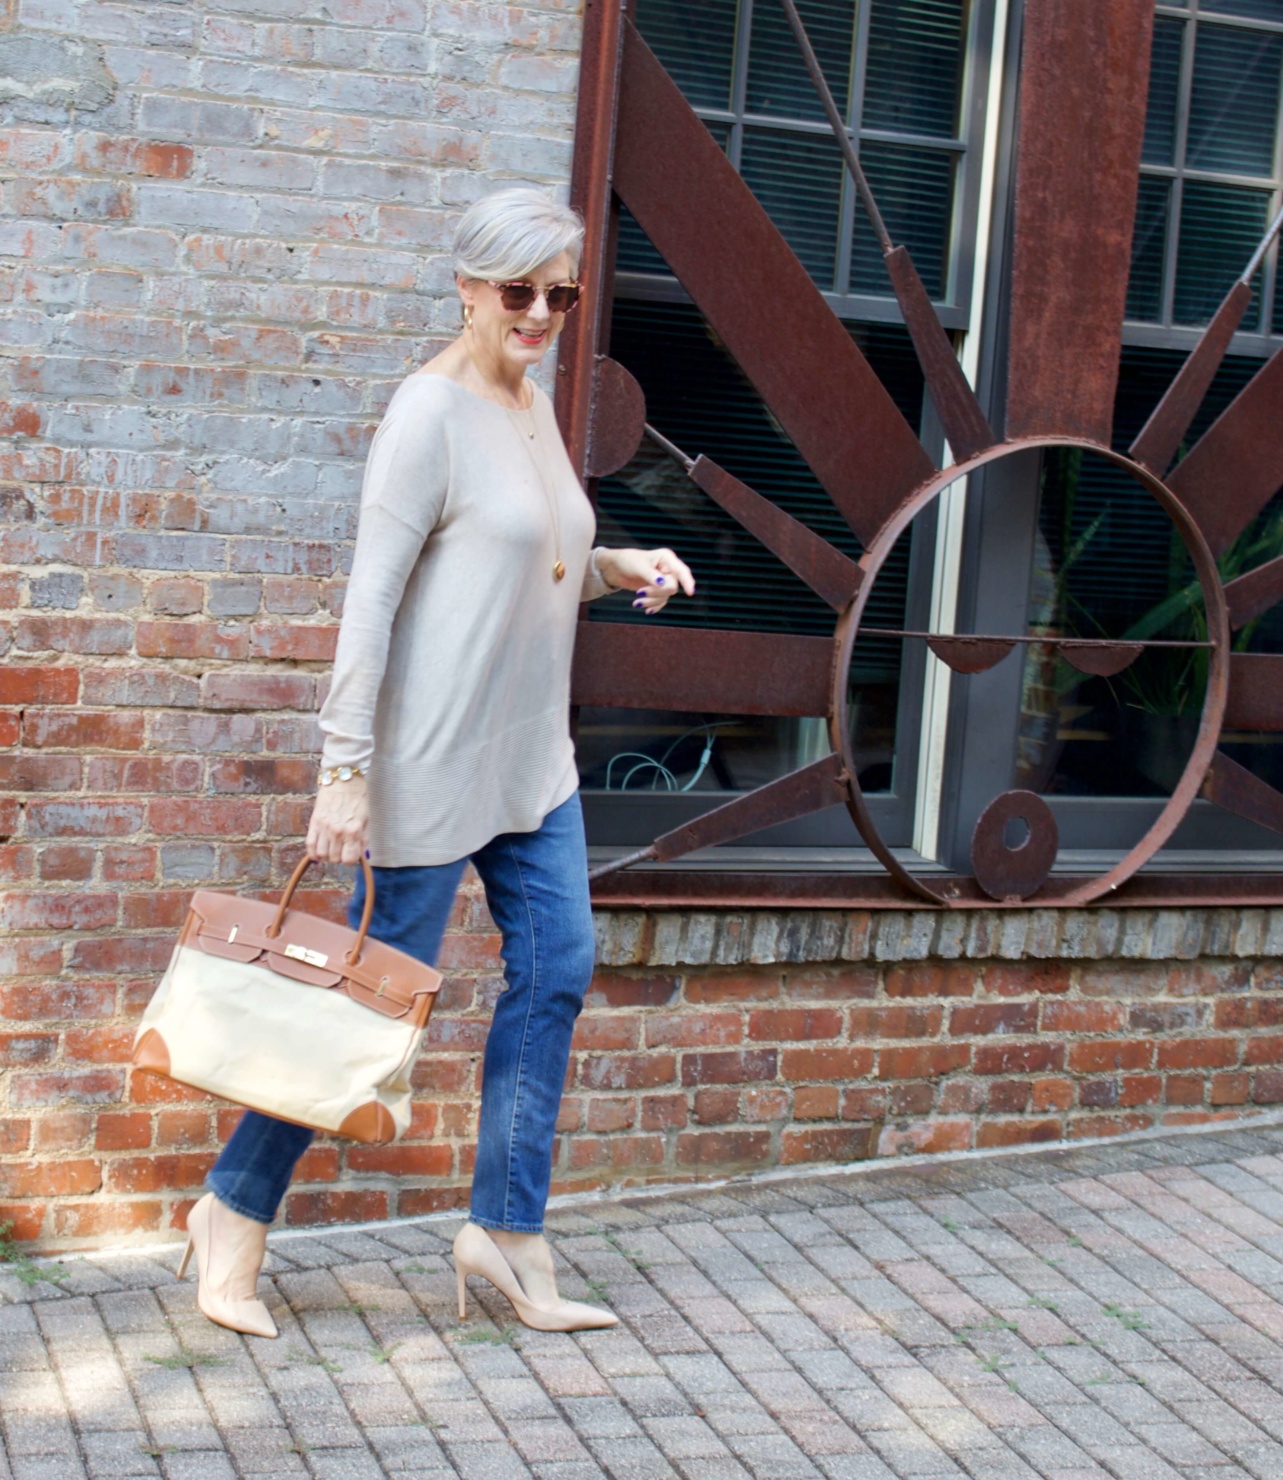 back to summer basics tunic, blue jeans, nude pumps and canvas handbag